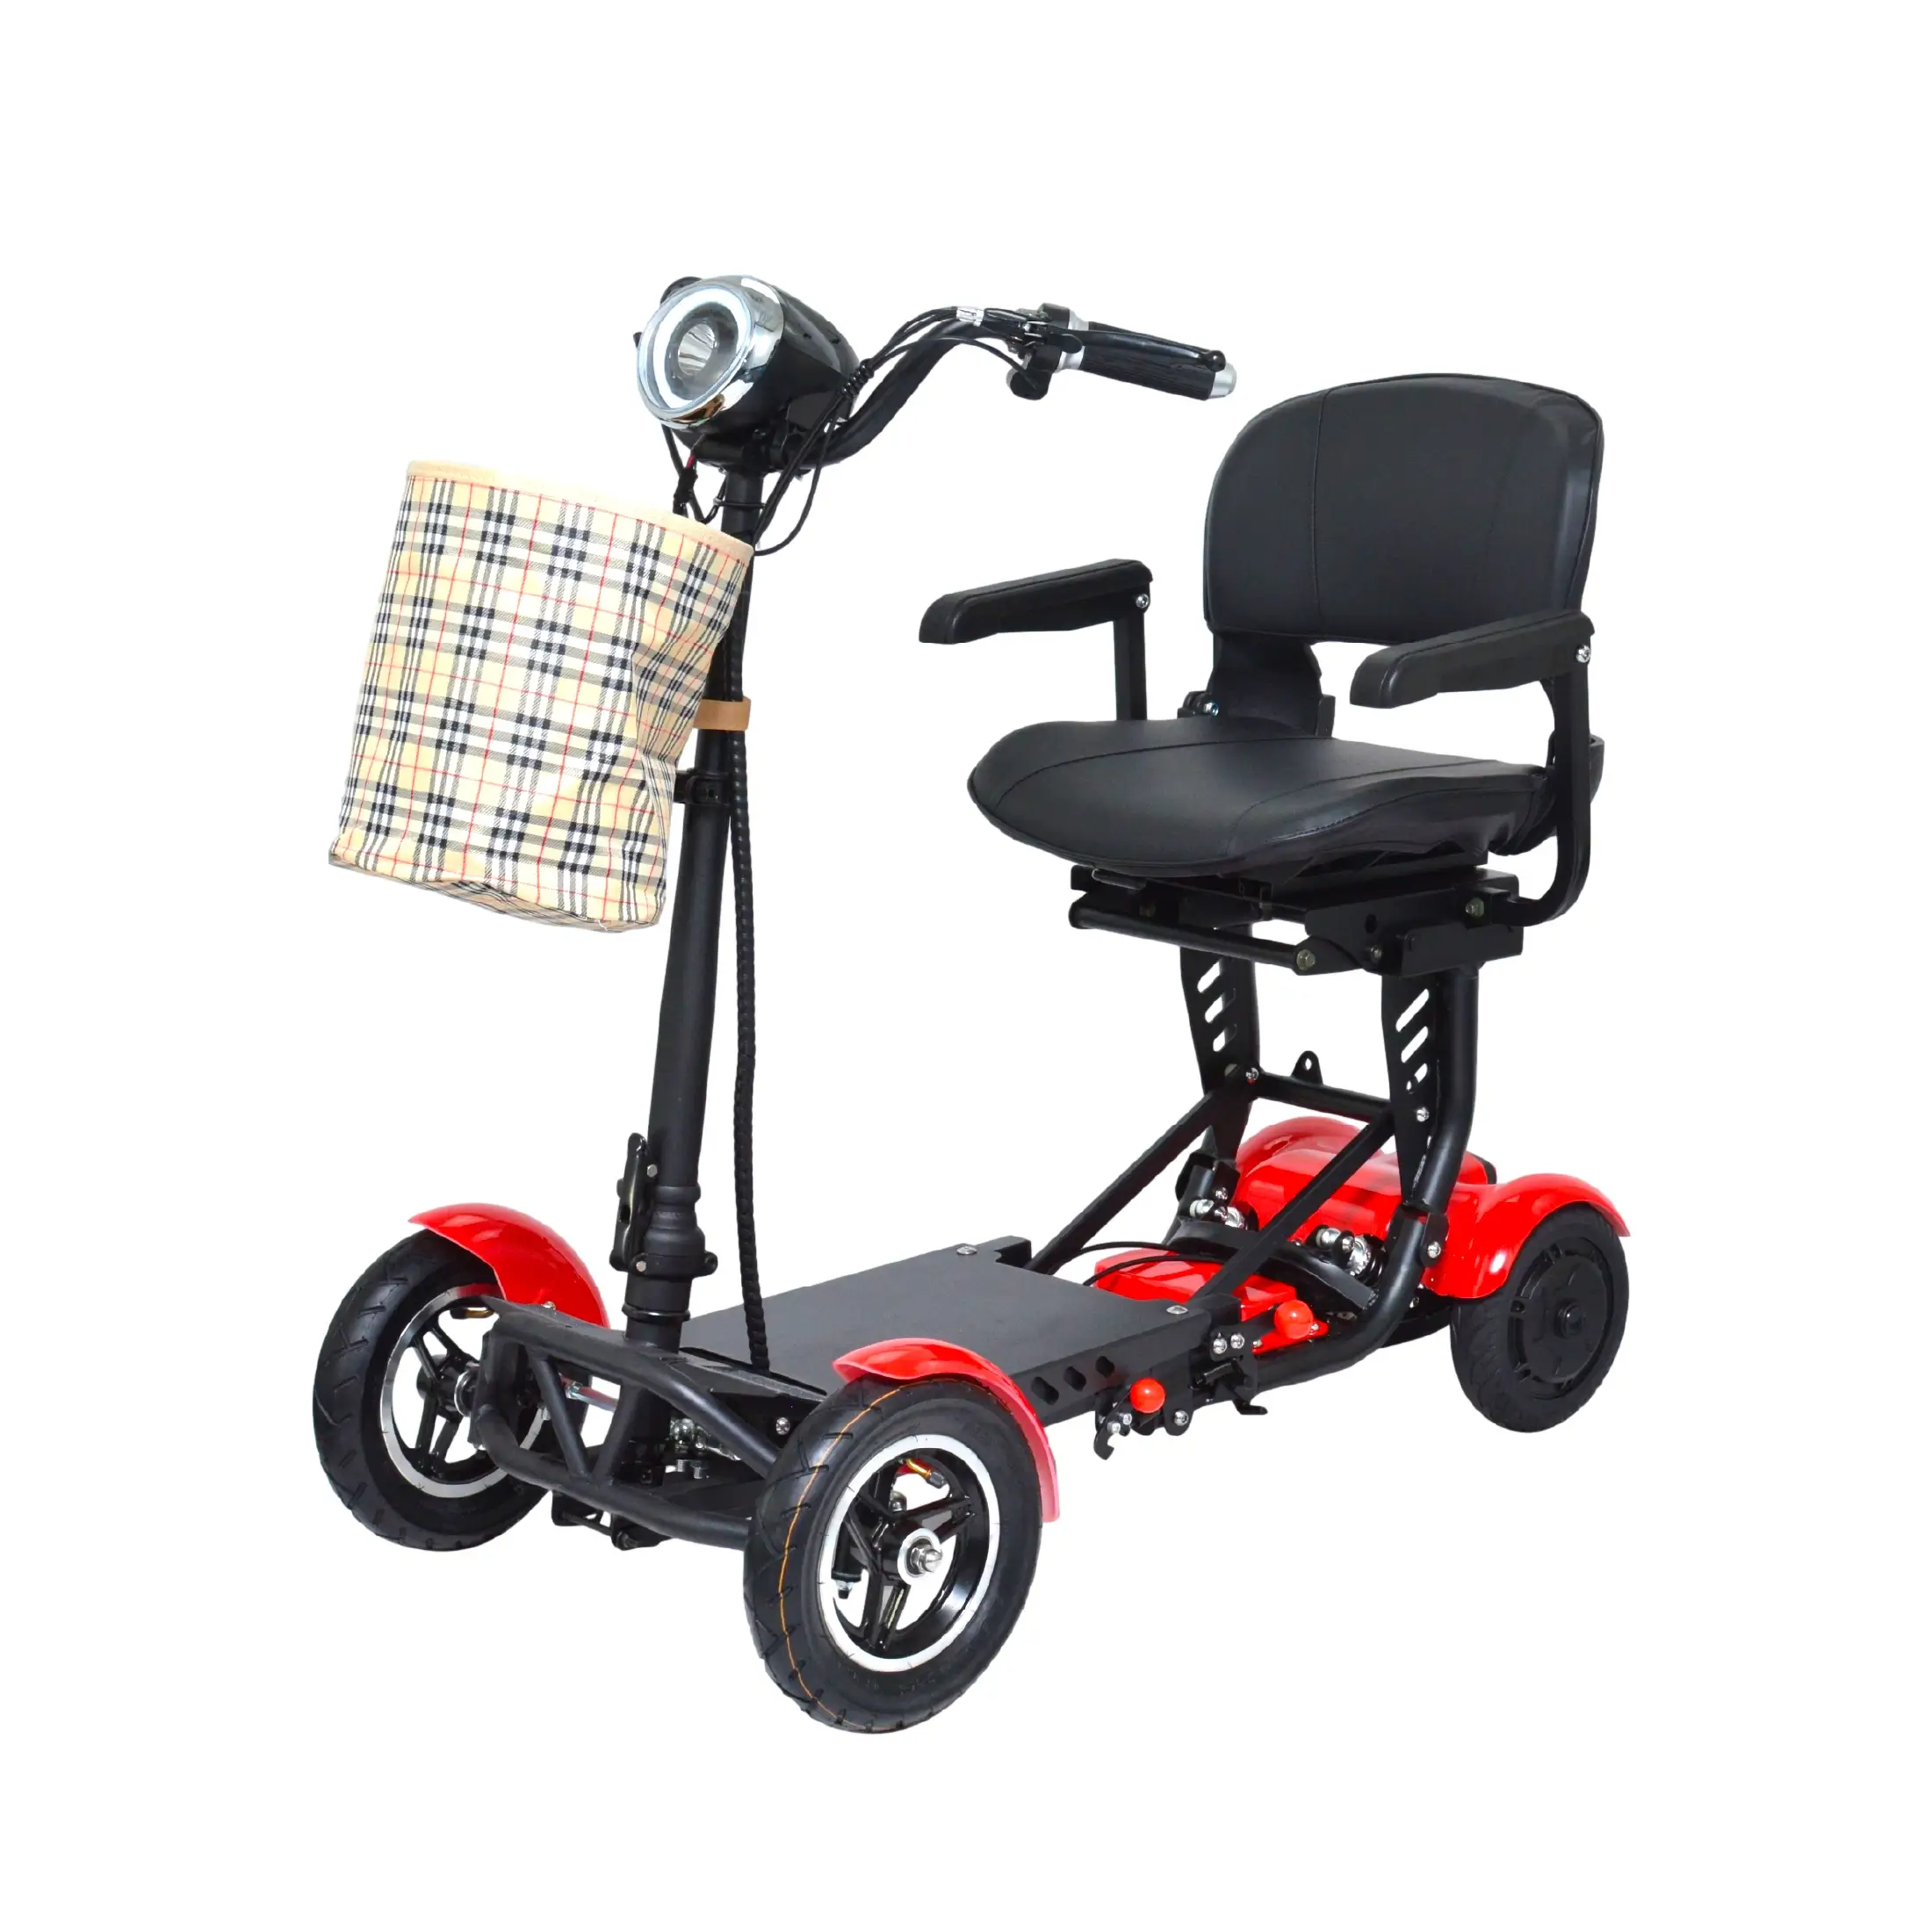 MS-3000 Foldable Mobility Scooter 400-500 lbs 5